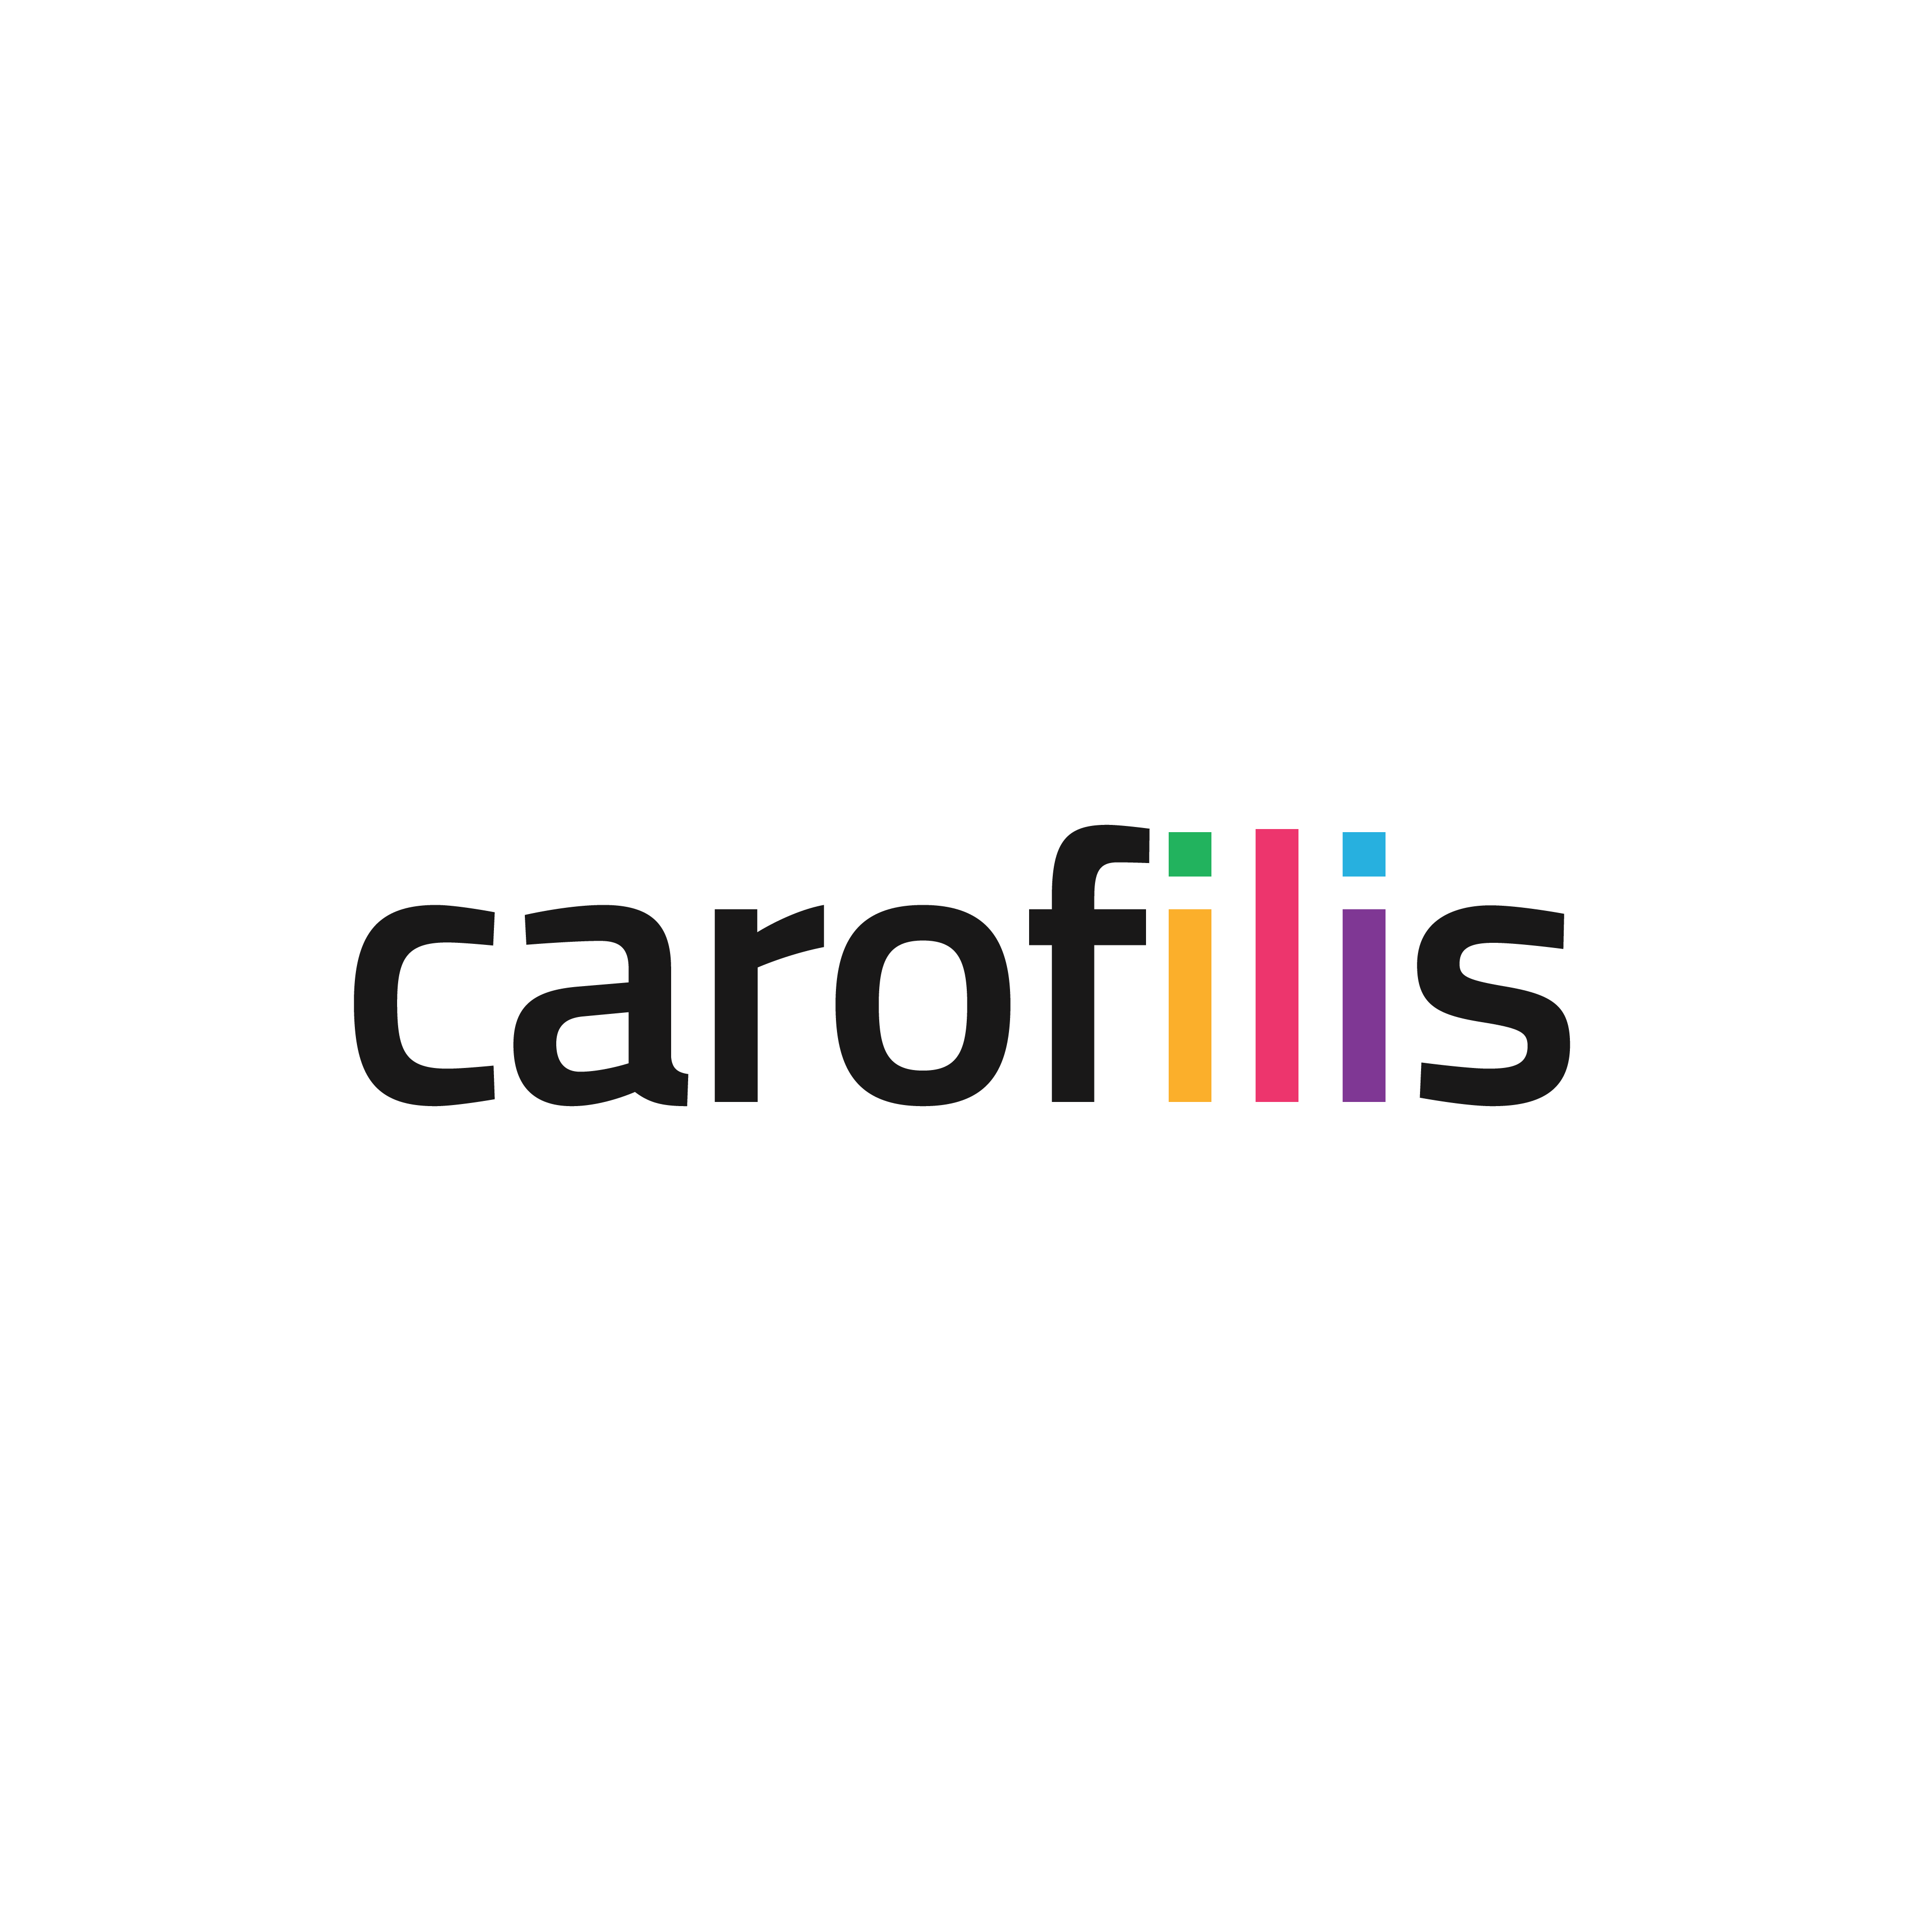 Carofilis logo design by logo designer Anthony Alava for your inspiration and for the worlds largest logo competition